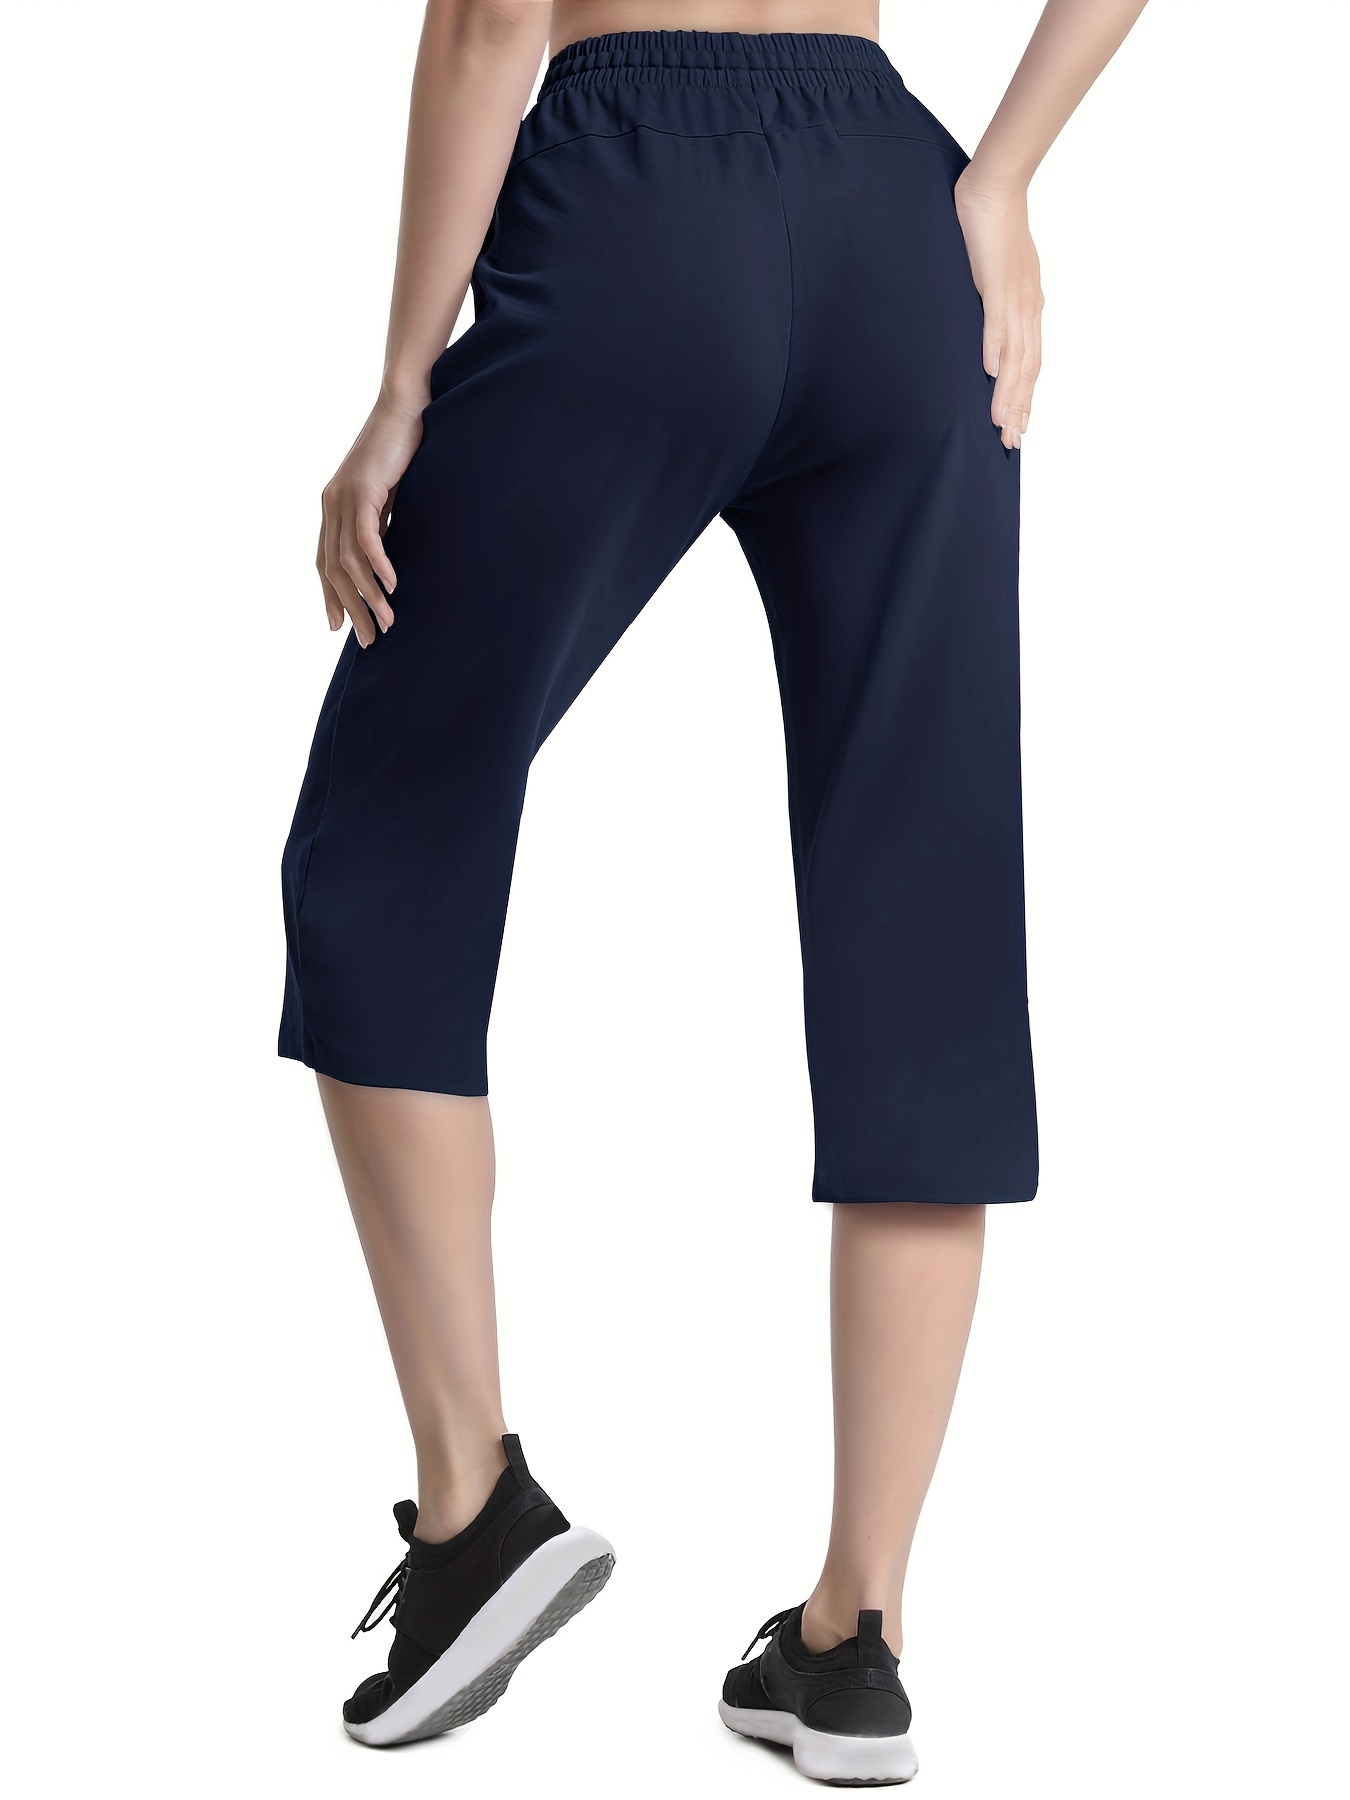 Womens Capri Active Pants With Pockets Drawstring Sweatpants Loose Lounge  Yoga Workout Running Pants, High-quality & Affordable